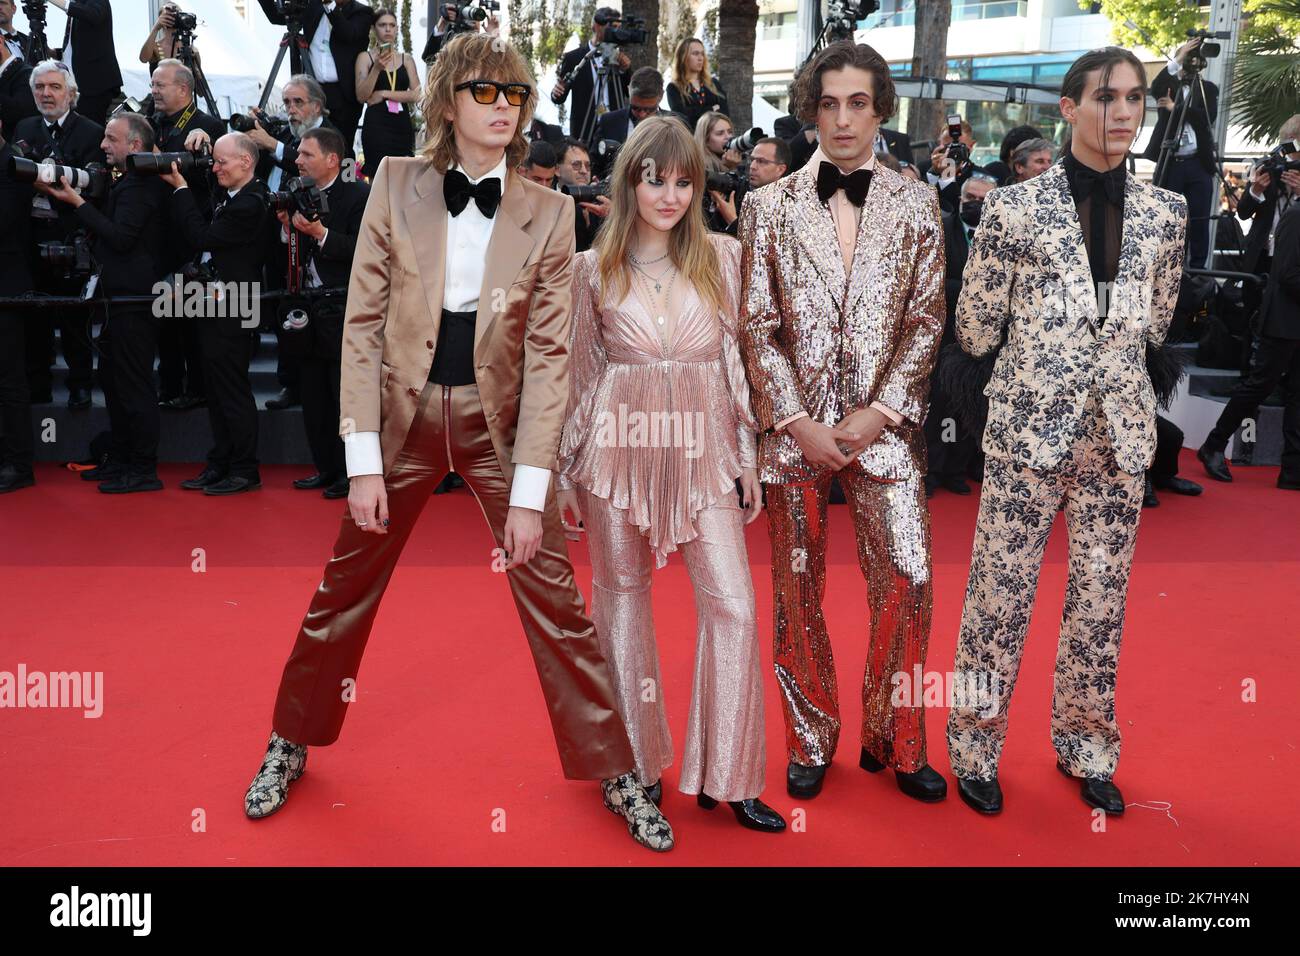 ©PHOTOPQR/NICE MATIN/Sebastien Botella ; Caussols ; 25/05/2022 ; Thomas Raggi, Victoria De Angelis, Damiano David and Ethan Torchio attend the screening of 'Elvis' during the 75th annual Cannes film festival at Palais des Festivals on May 25, 2022 in Cannes, France. Stock Photo